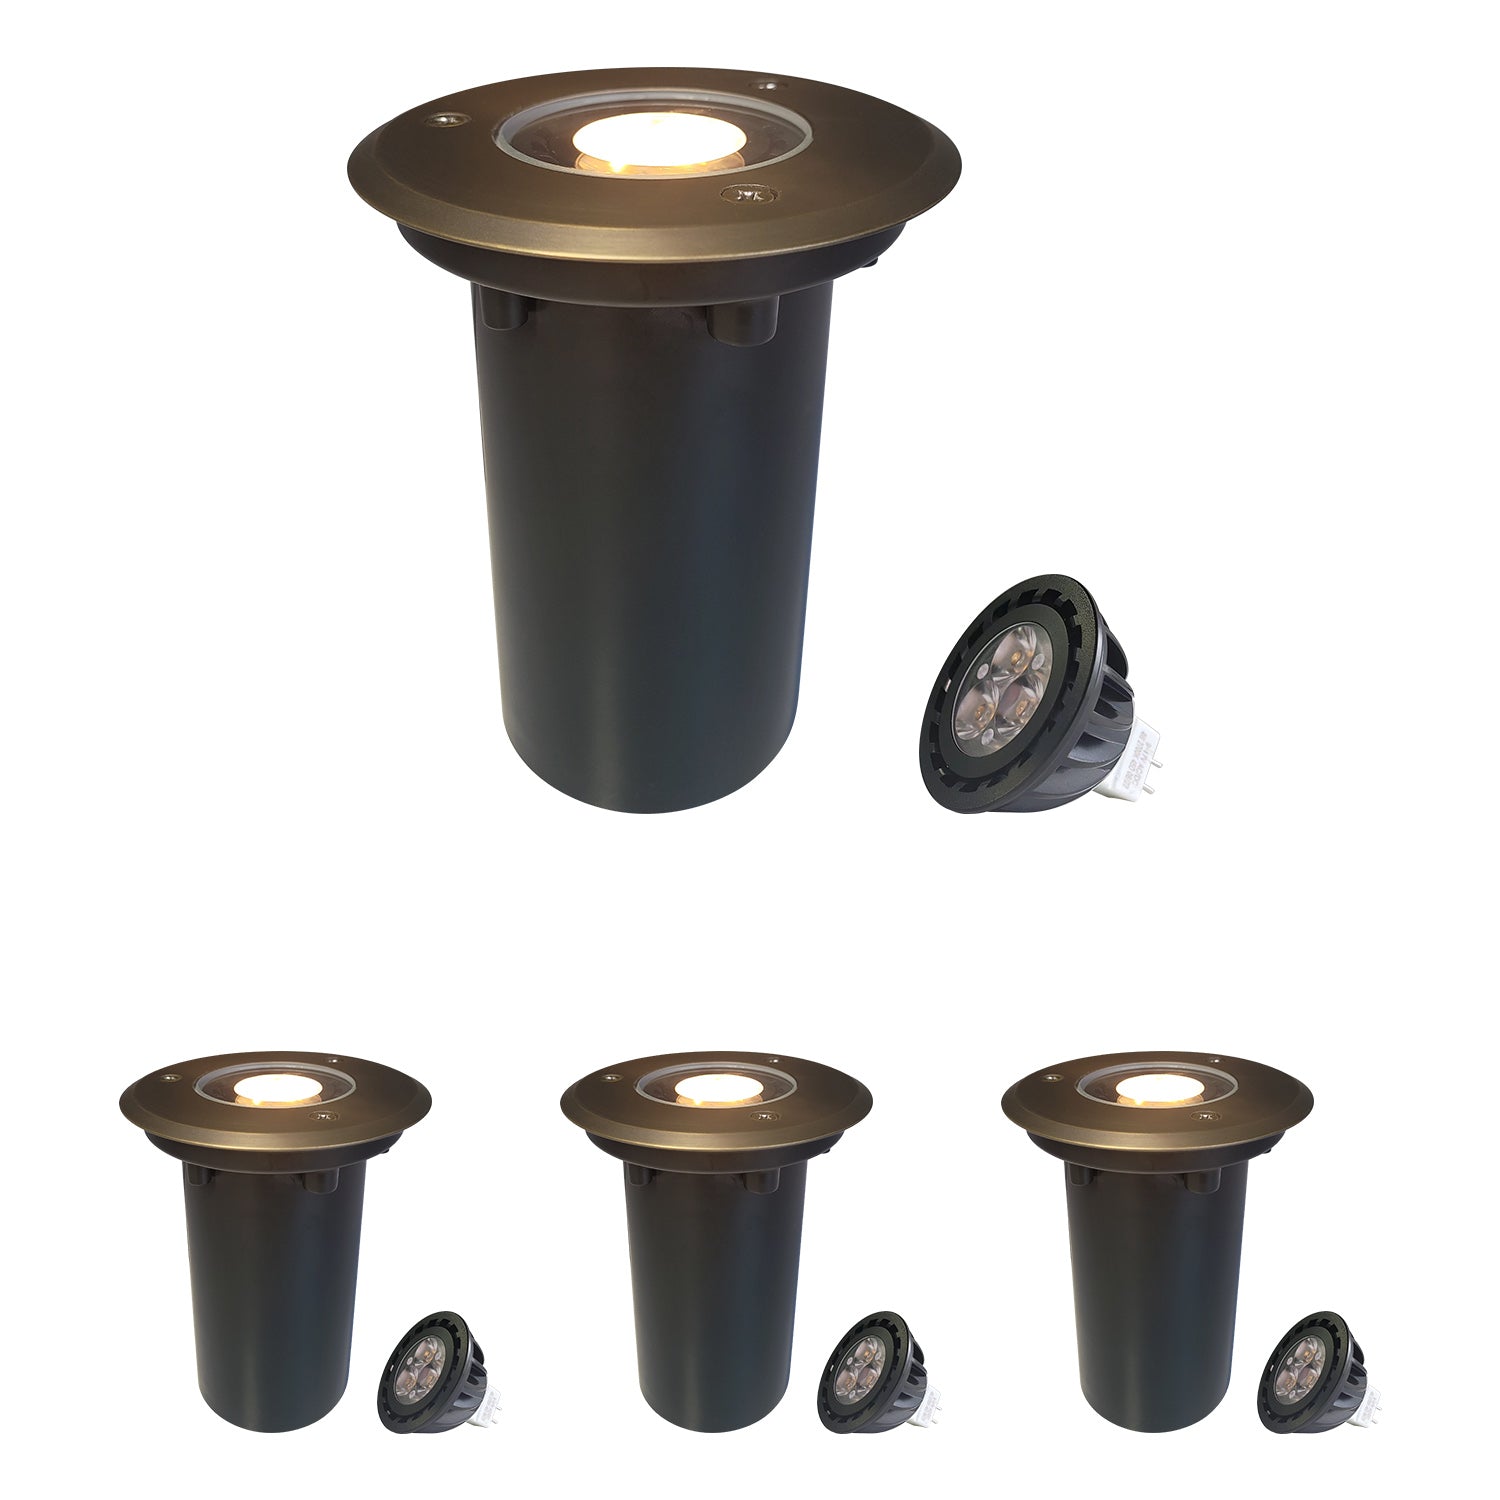 LED in-ground well lights for landscape tree lighting showcasing outdoor low voltage pathway illumination COG303B.